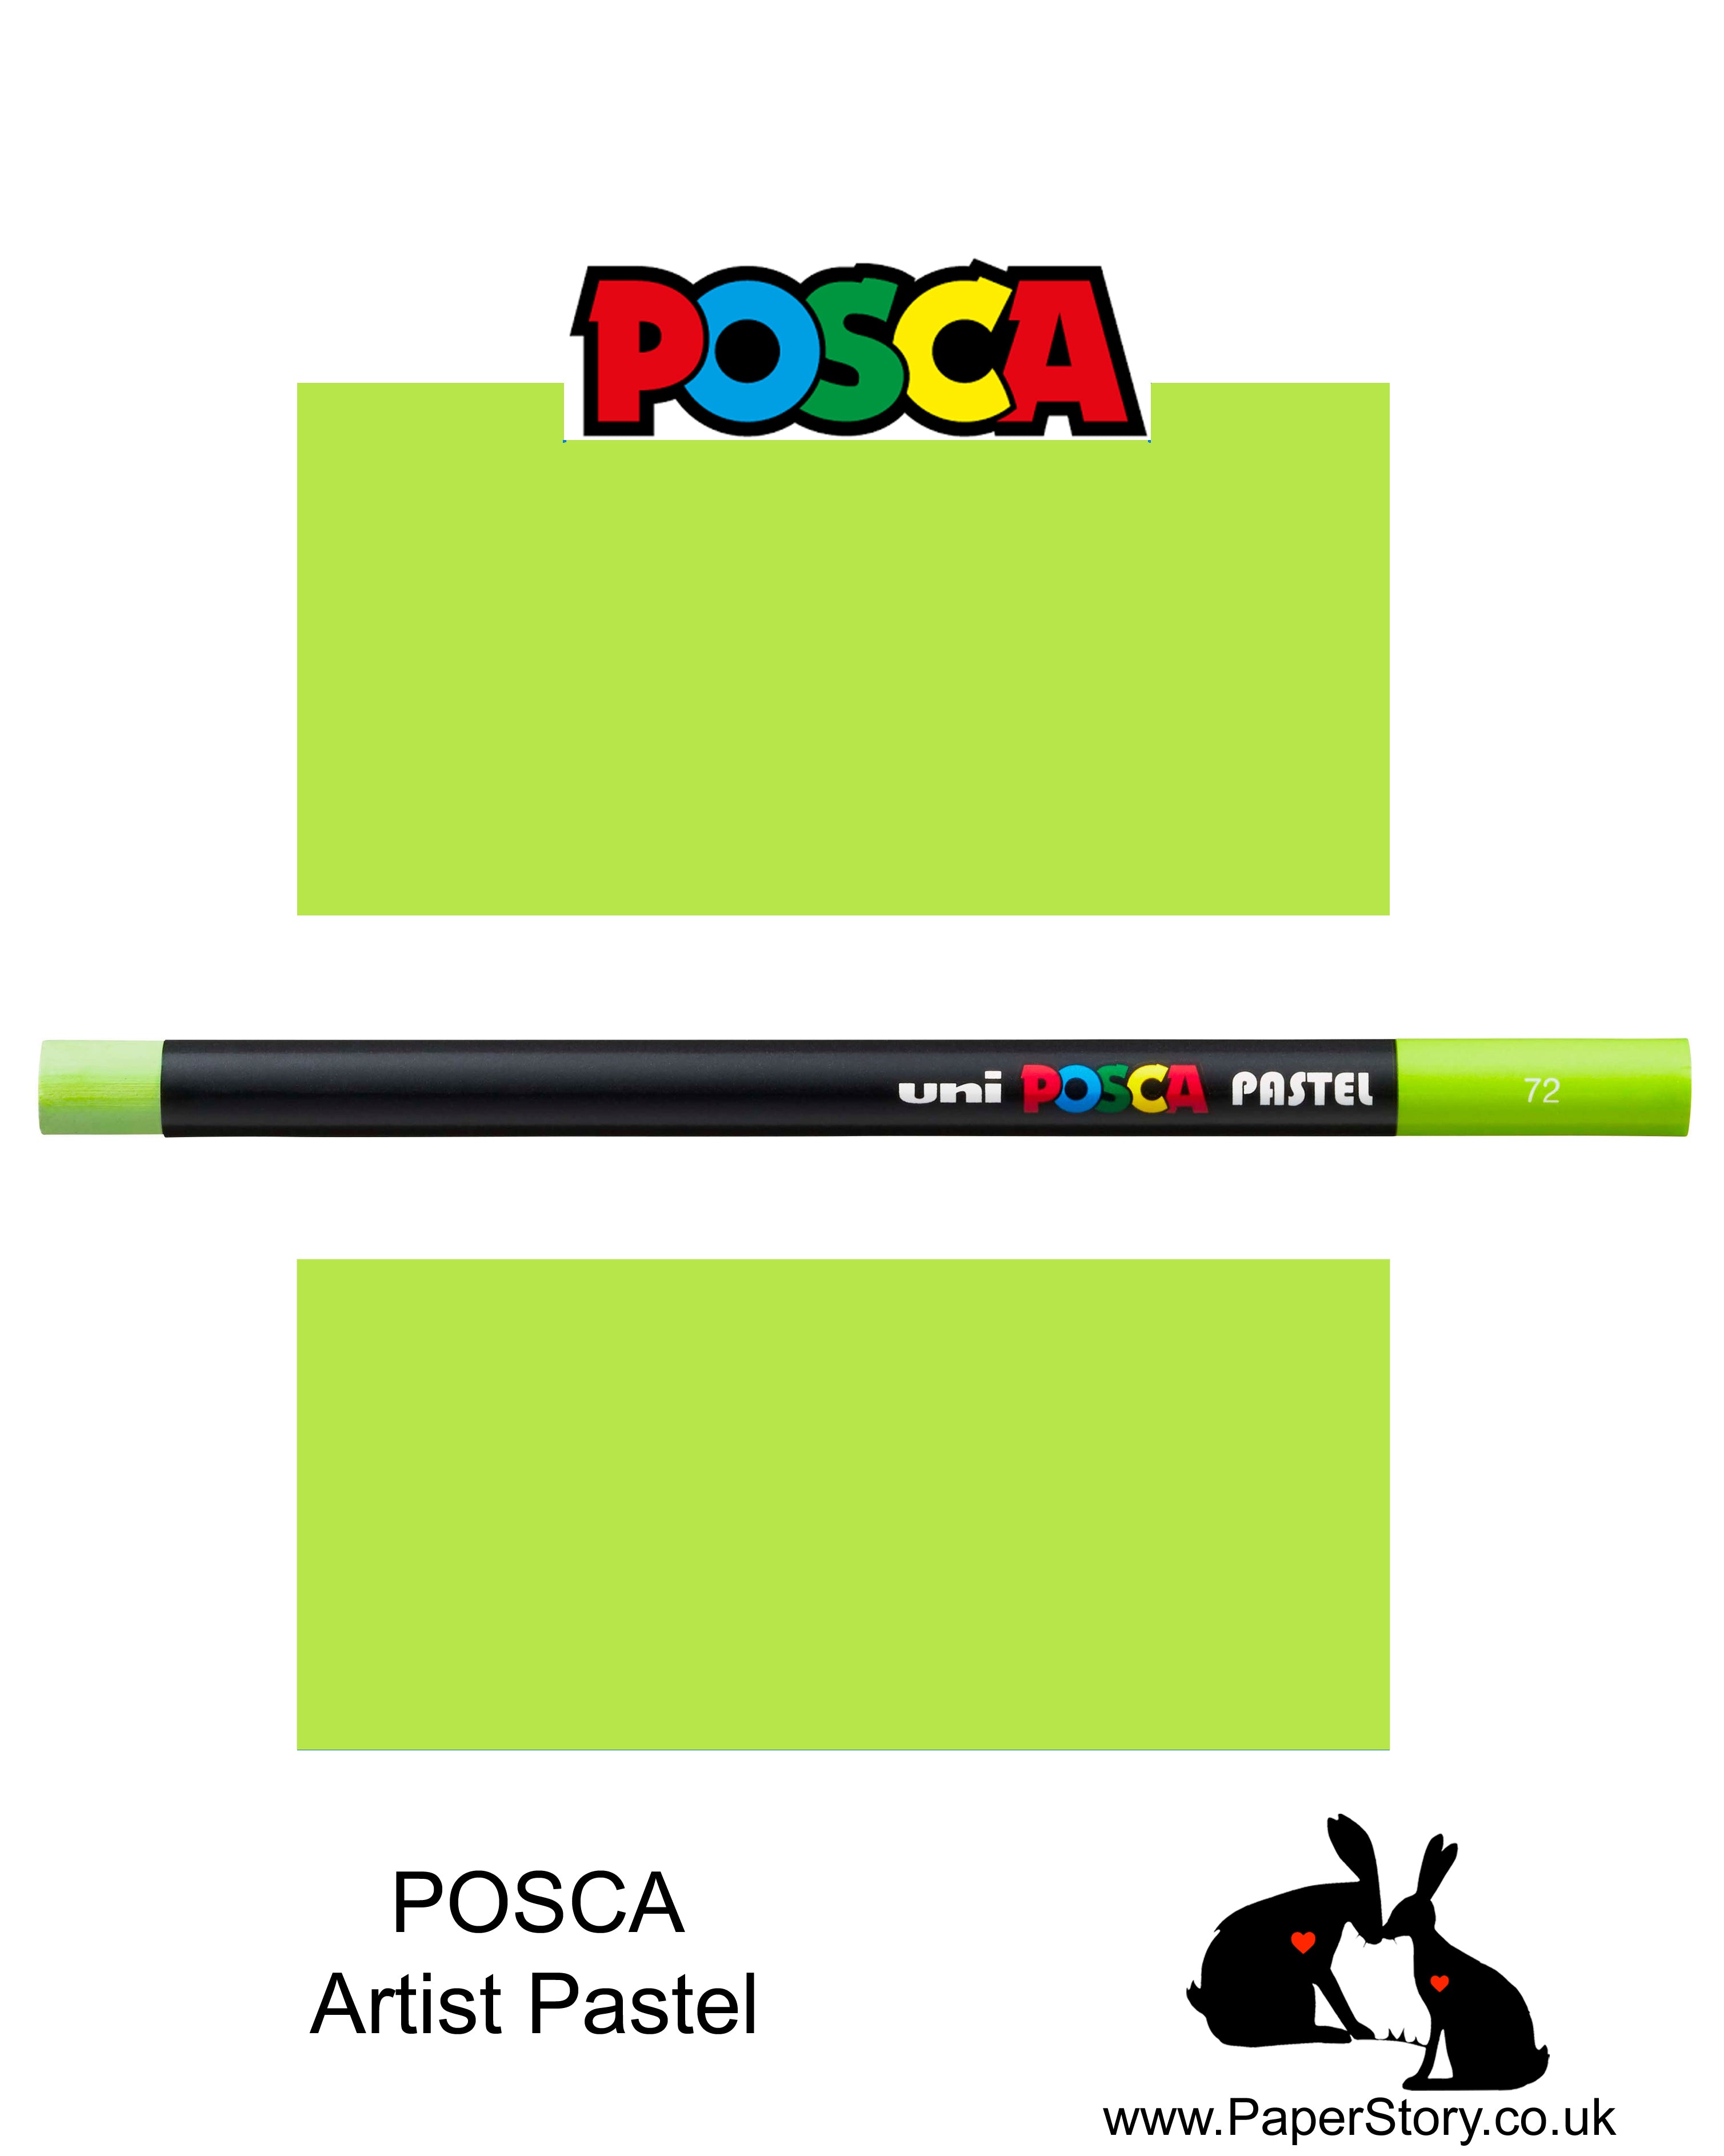 New Uni POSCA Pastels, Apple Green, these  new style wax and oil mixed pastel colours can be blended and overlaid, you can stipple, colour block, cross-hatch, scratch and outline. You can heat the sticks to create textured effects.